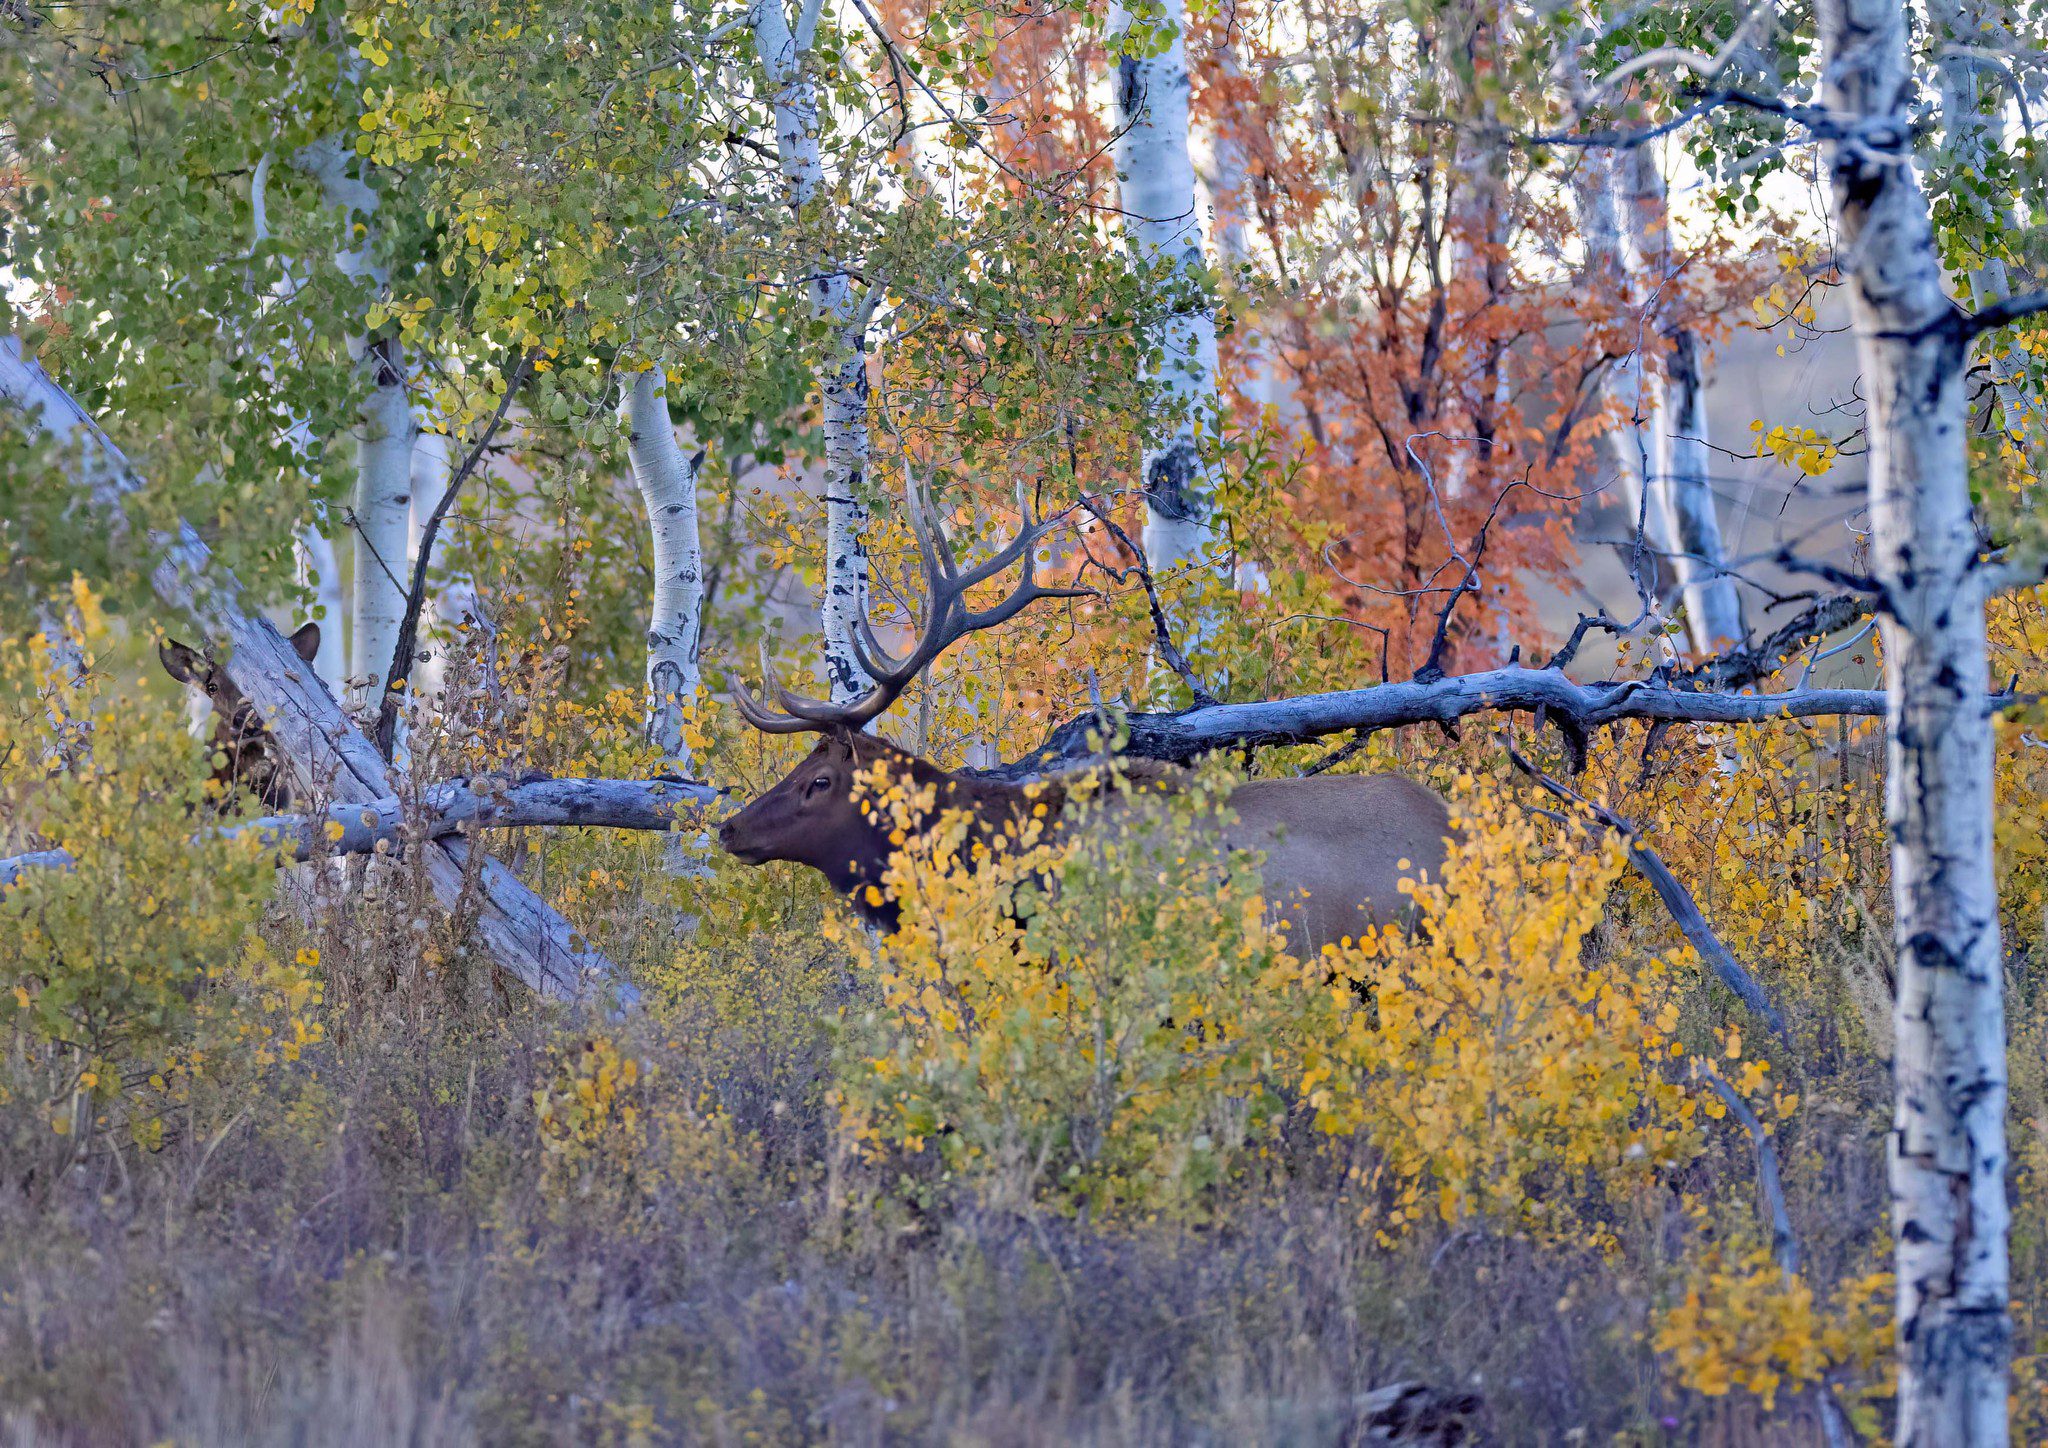 A bull elk moving through the trees with a cow elk in the background